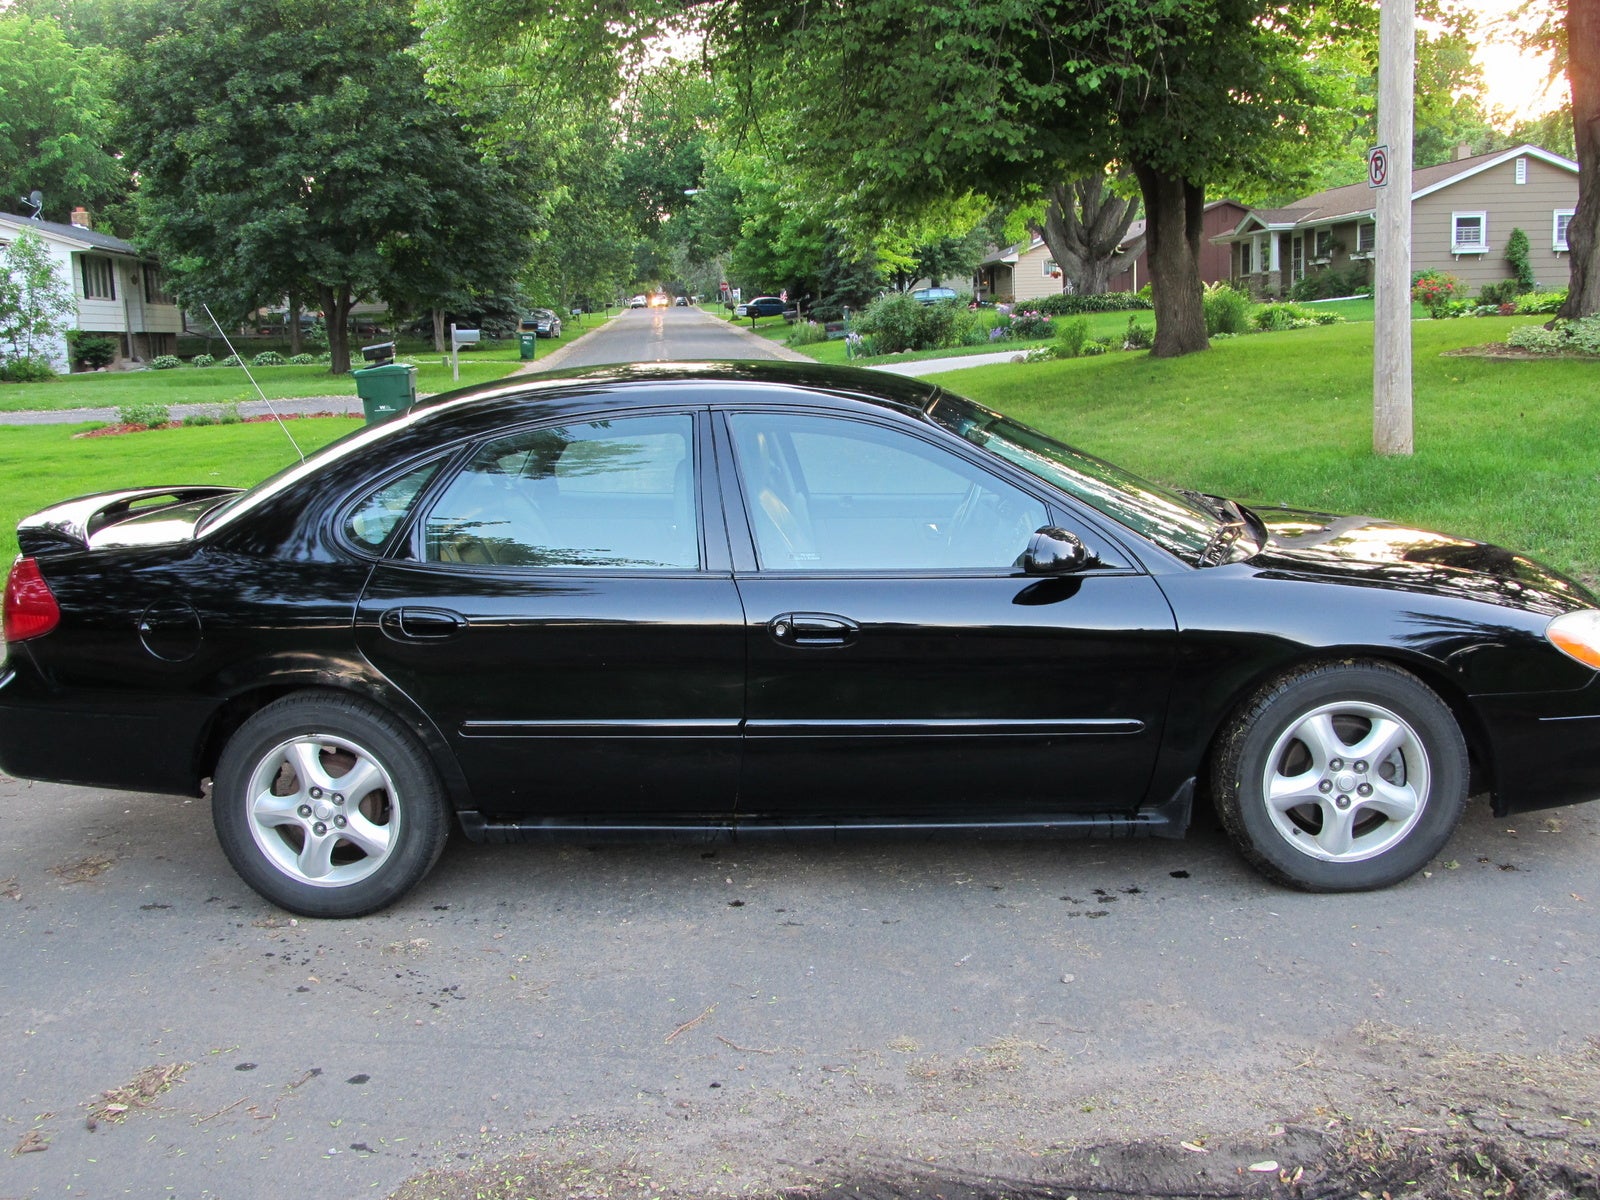 Are 2001 Ford Taurus Good Cars?